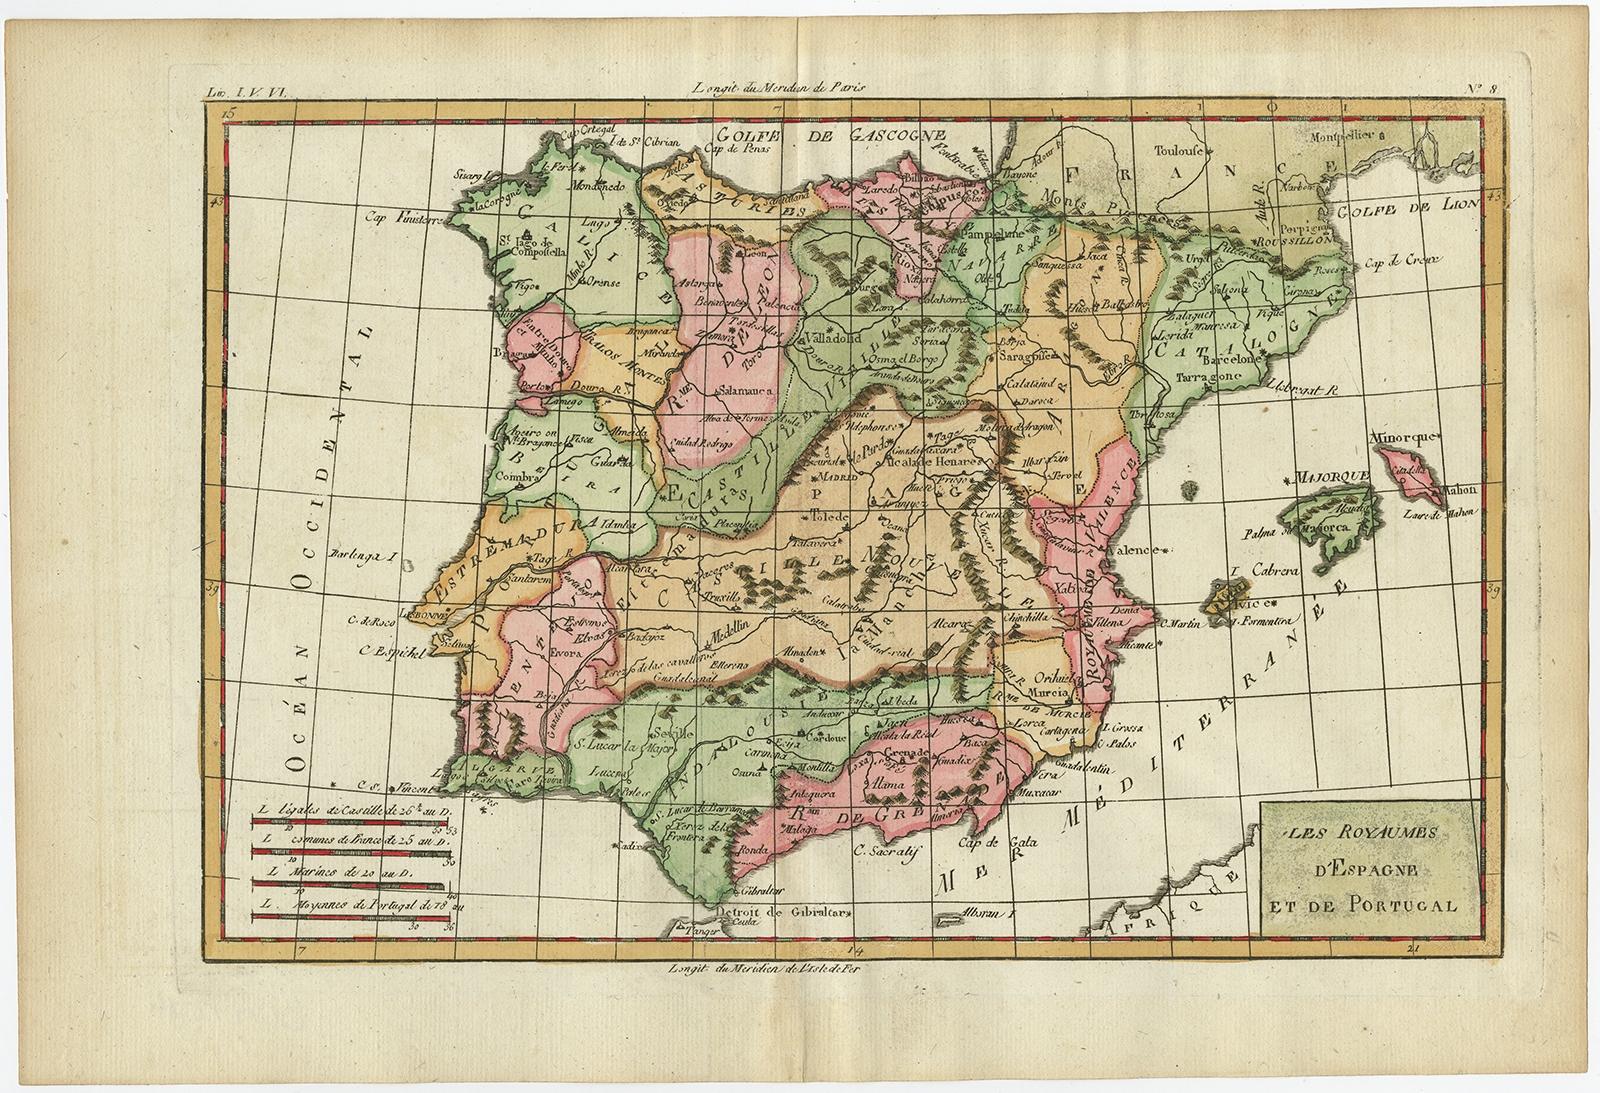 Antique map titled 'Les Royaumes d'Espagne et de Portugal.' 

Map of Spain and Portugal. Includes the islands of Ibiza, Minorque, and Majorque. Shows towns, rivers, some topographical features, political boundaries and important roadways. Source